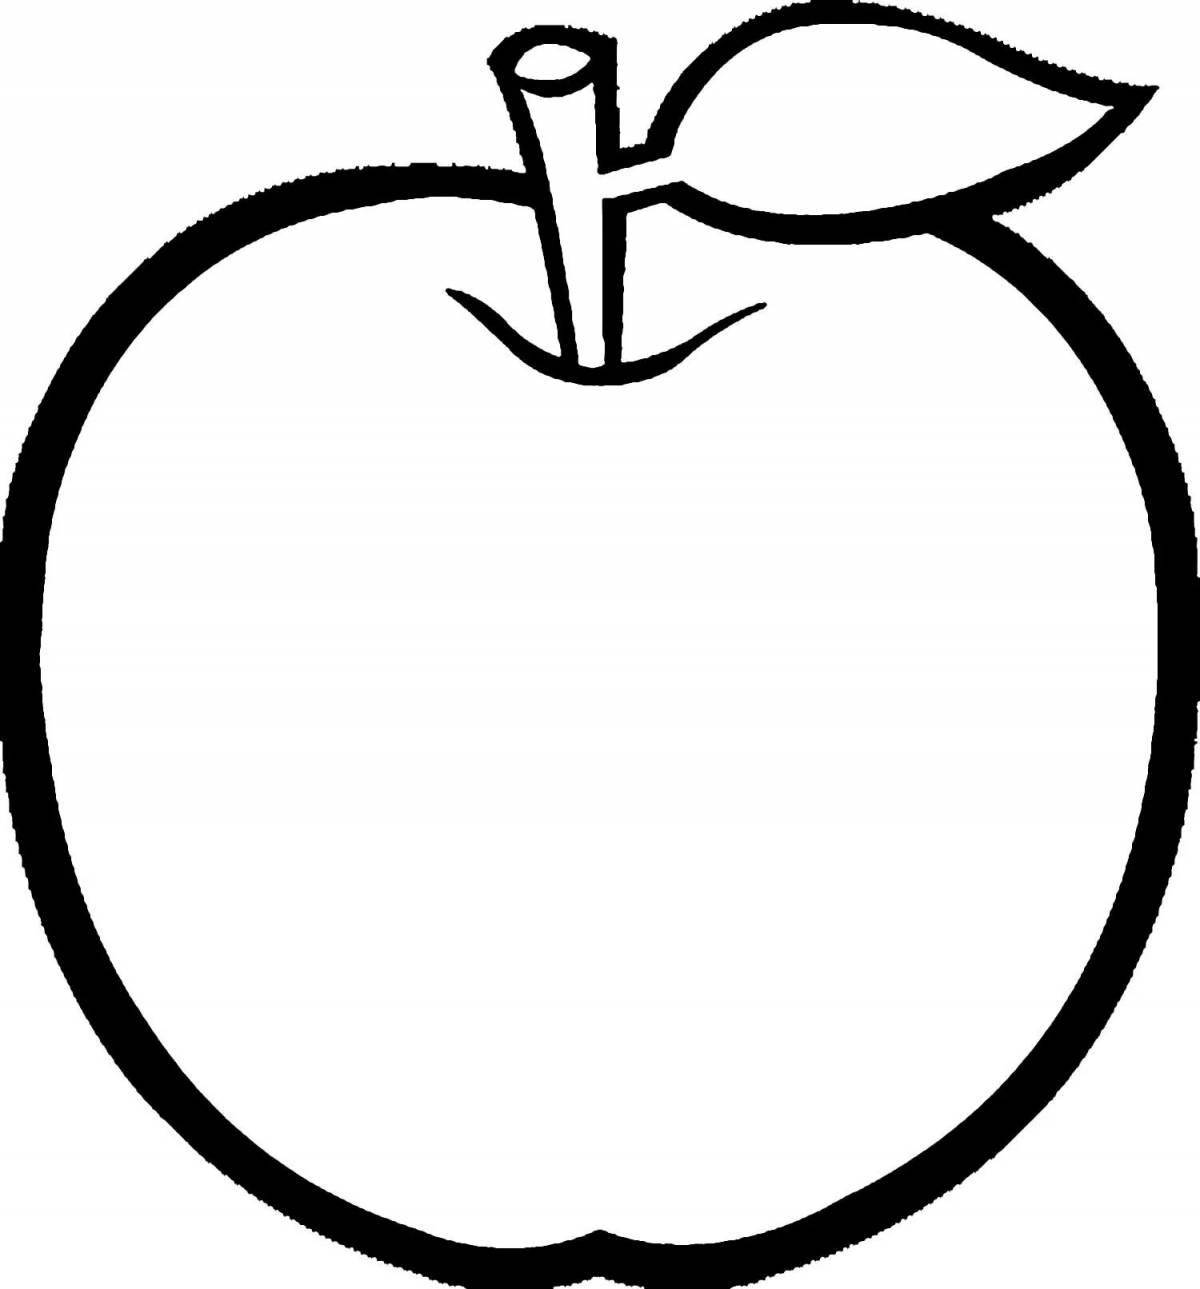 Coloring page with intricate drawing of an apple